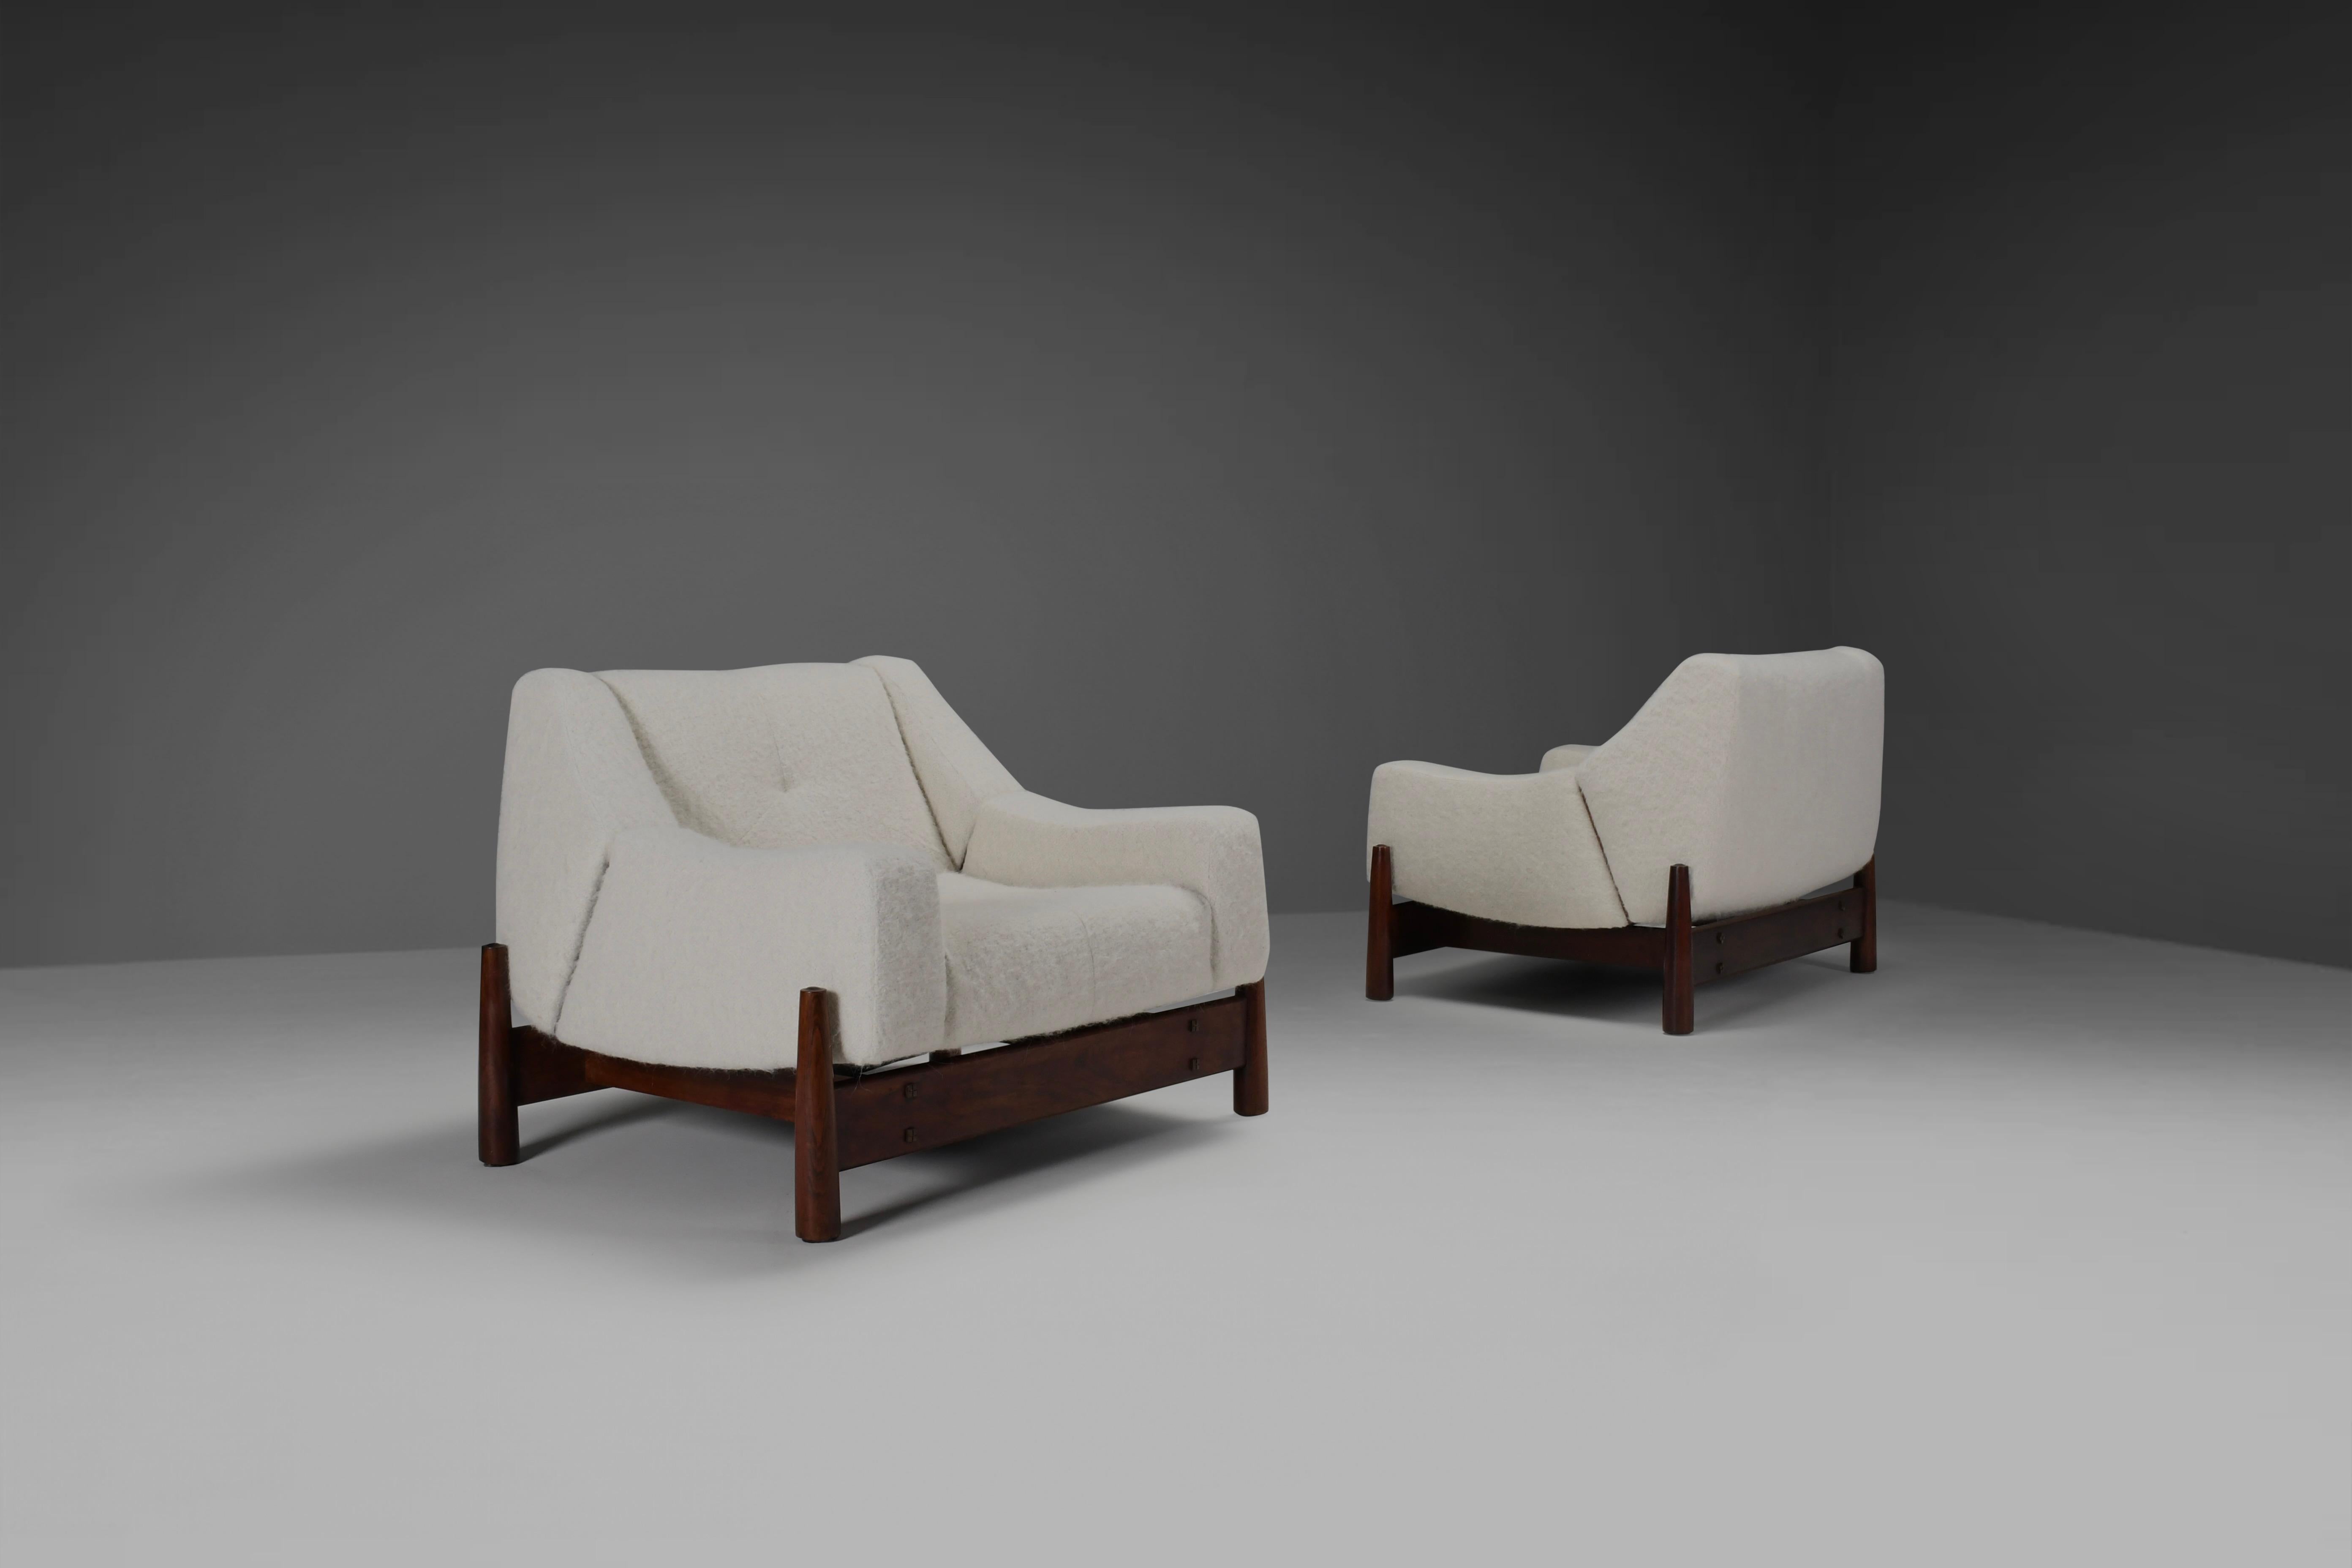 Exceptional pair of restored Brazilian lounge chairs in excellent condition.

Manufactured by Móveis Cimo, Brazil in the late 1950s.

The chairs feature an organic shaped seat and backrest that seams to float over the wooden frame. 
We reupholstered